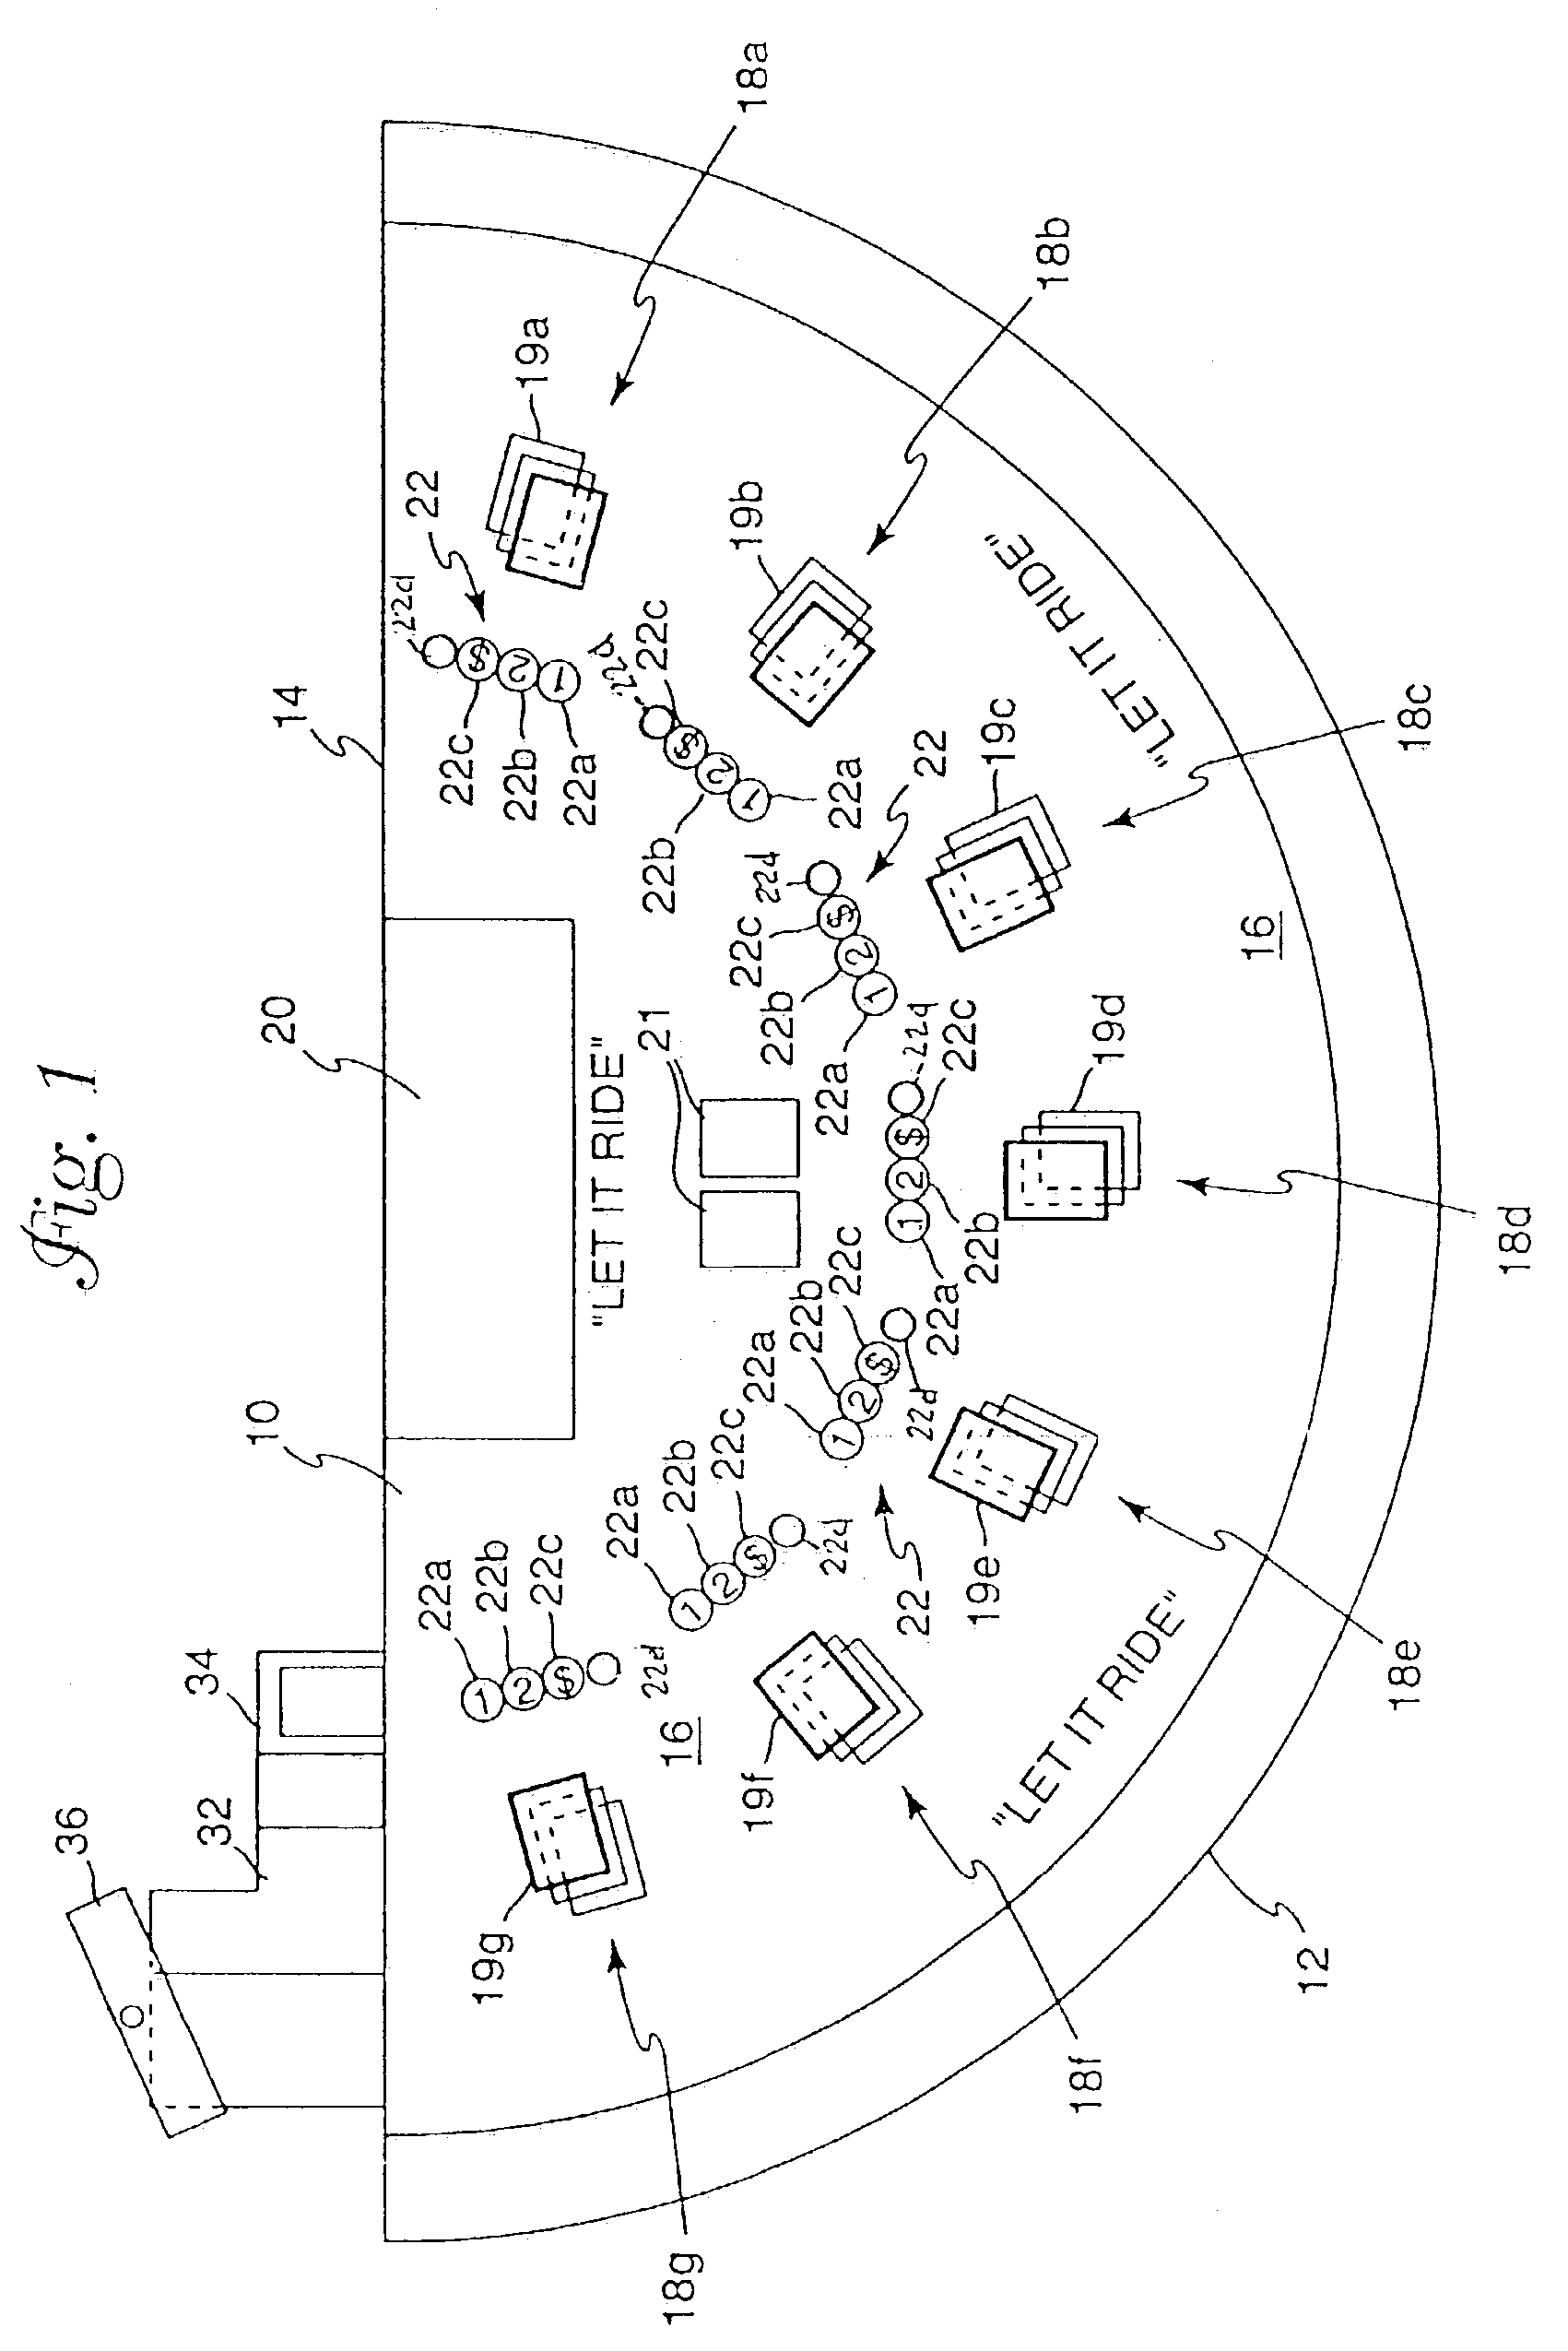 Method of playing a poker-type wagering game with multiple betting options